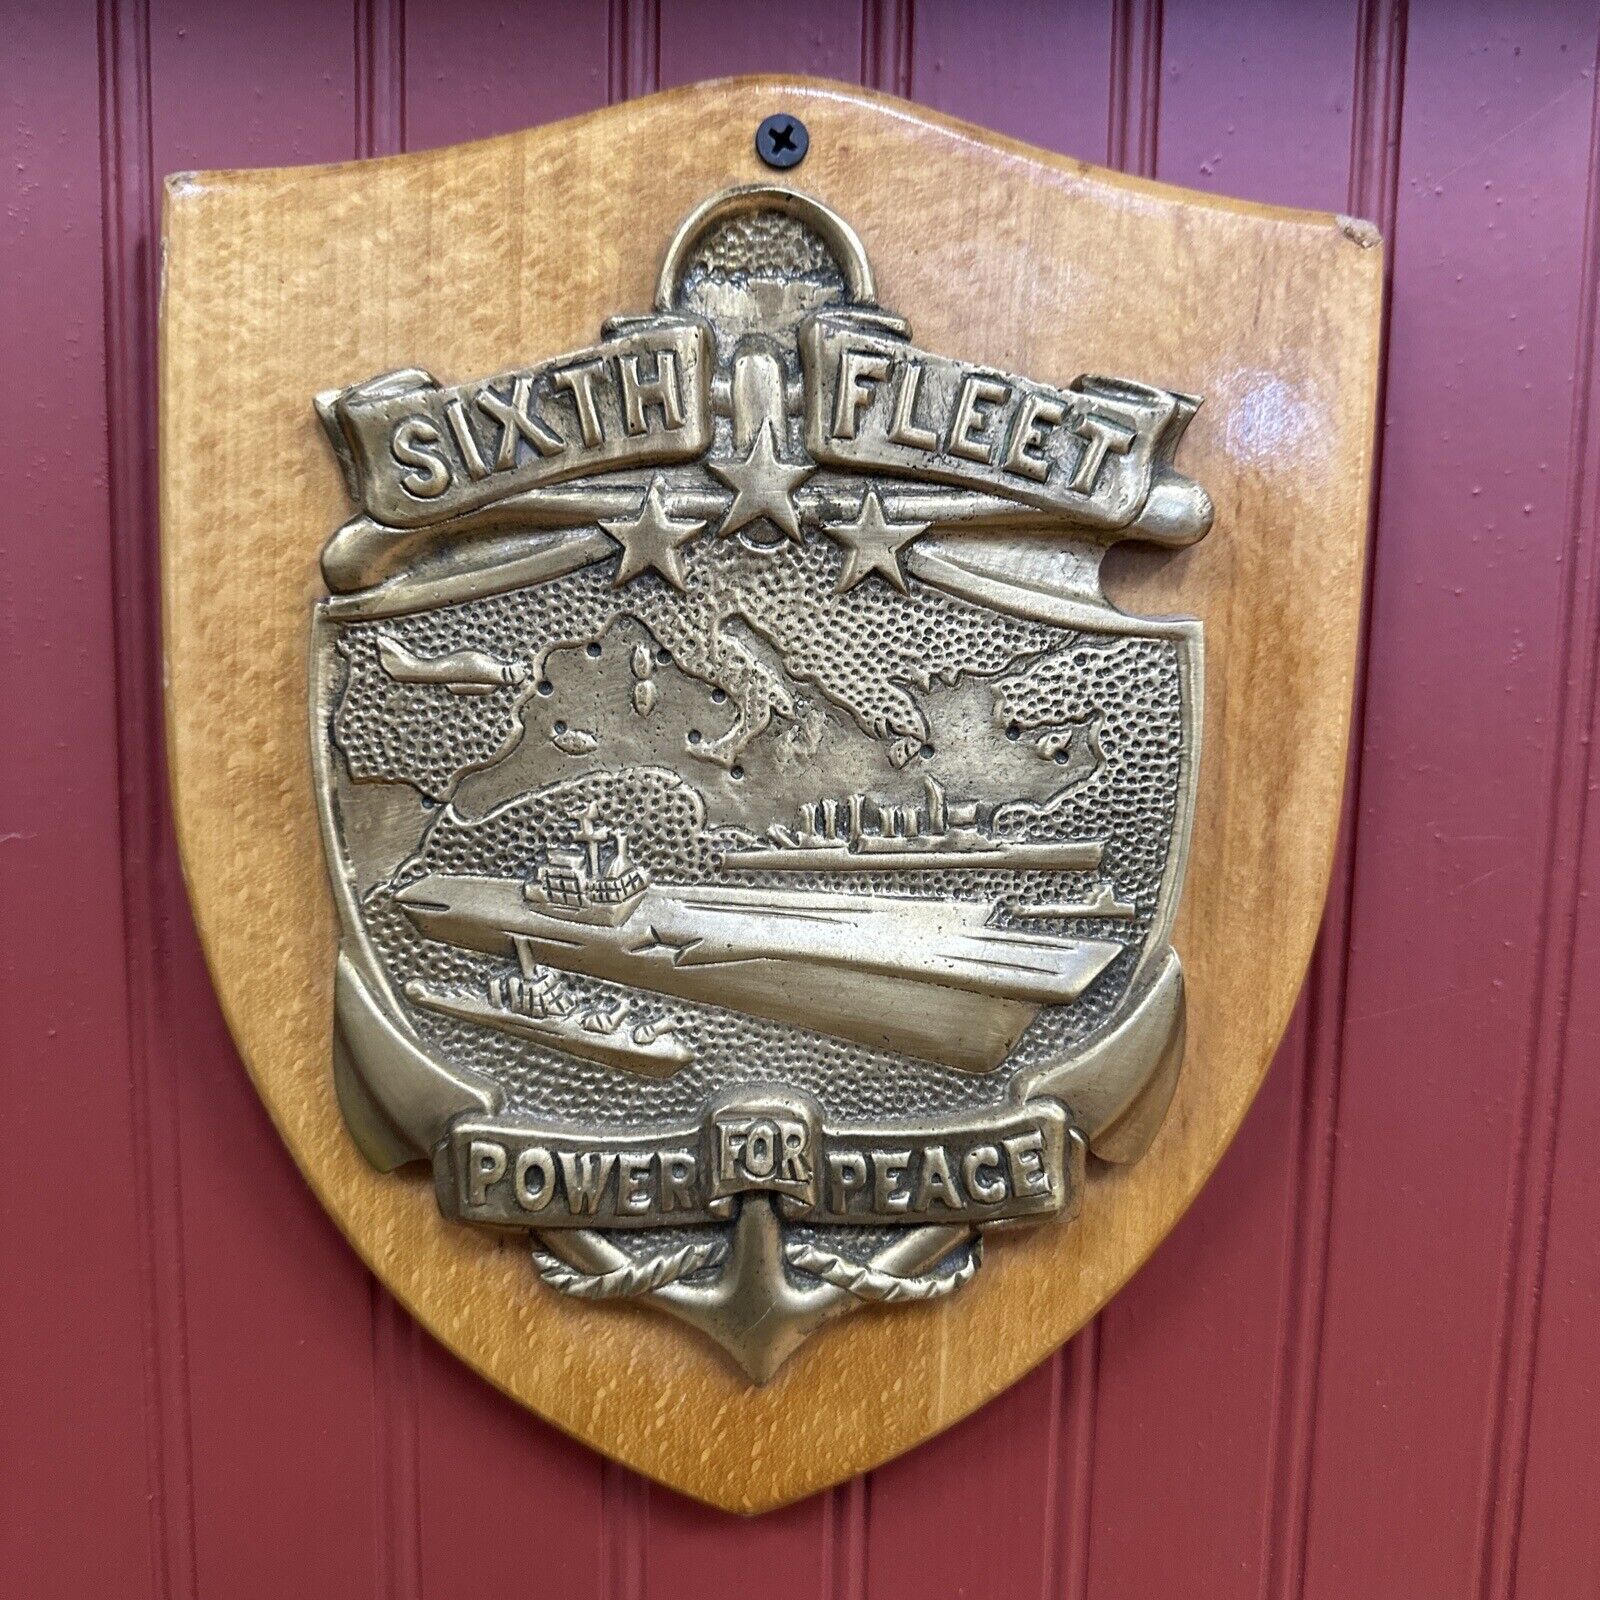 Navy Sixth Fleet Power For Peace plaque vintage Brass